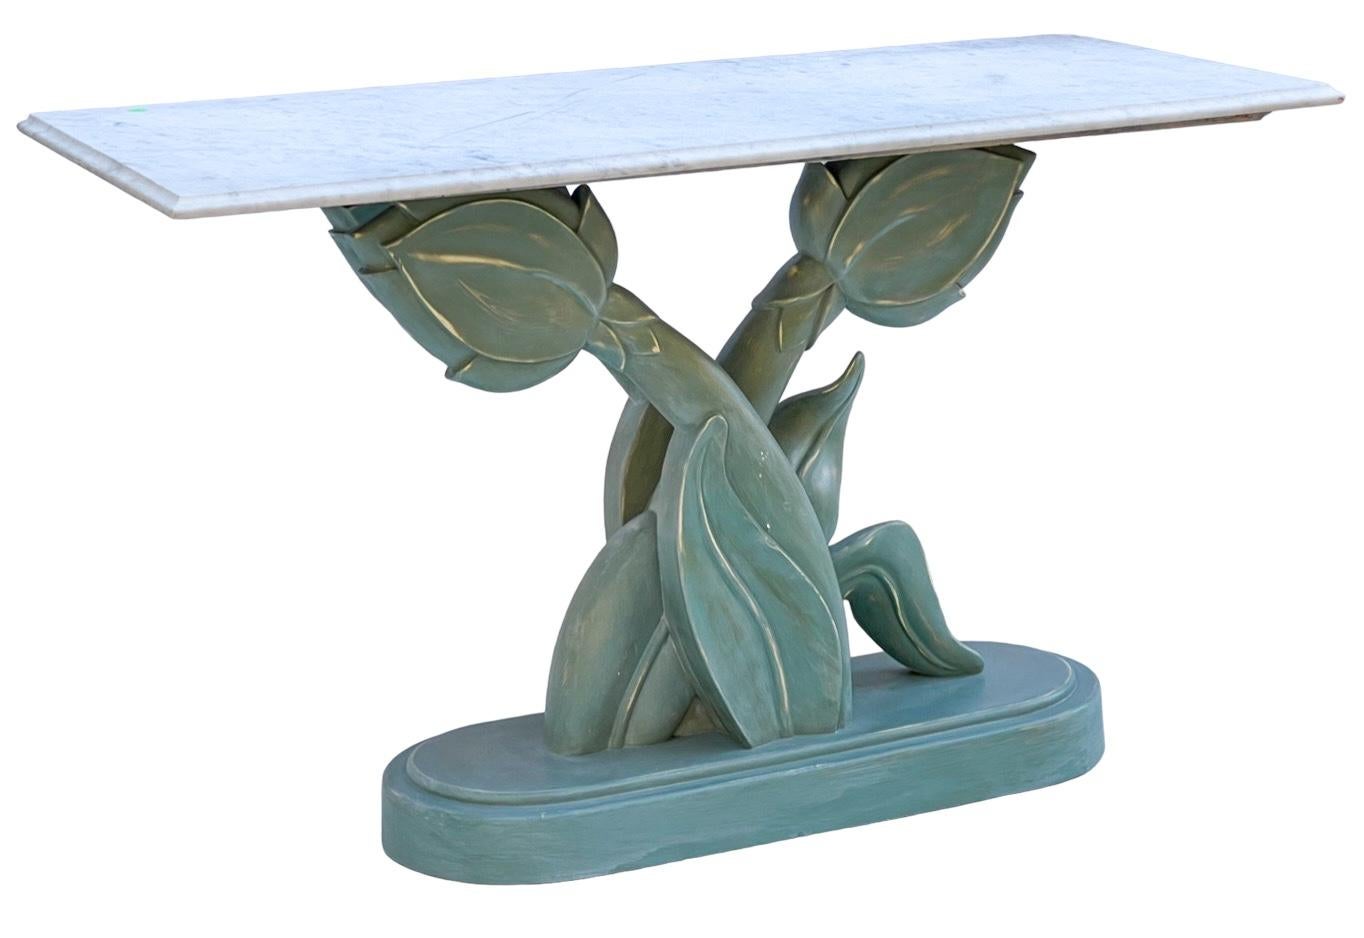 Italian Hand Painted Tulip Form Marble Top Console Tables Att. Casa Bique - Pair In Good Condition For Sale In Kennesaw, GA